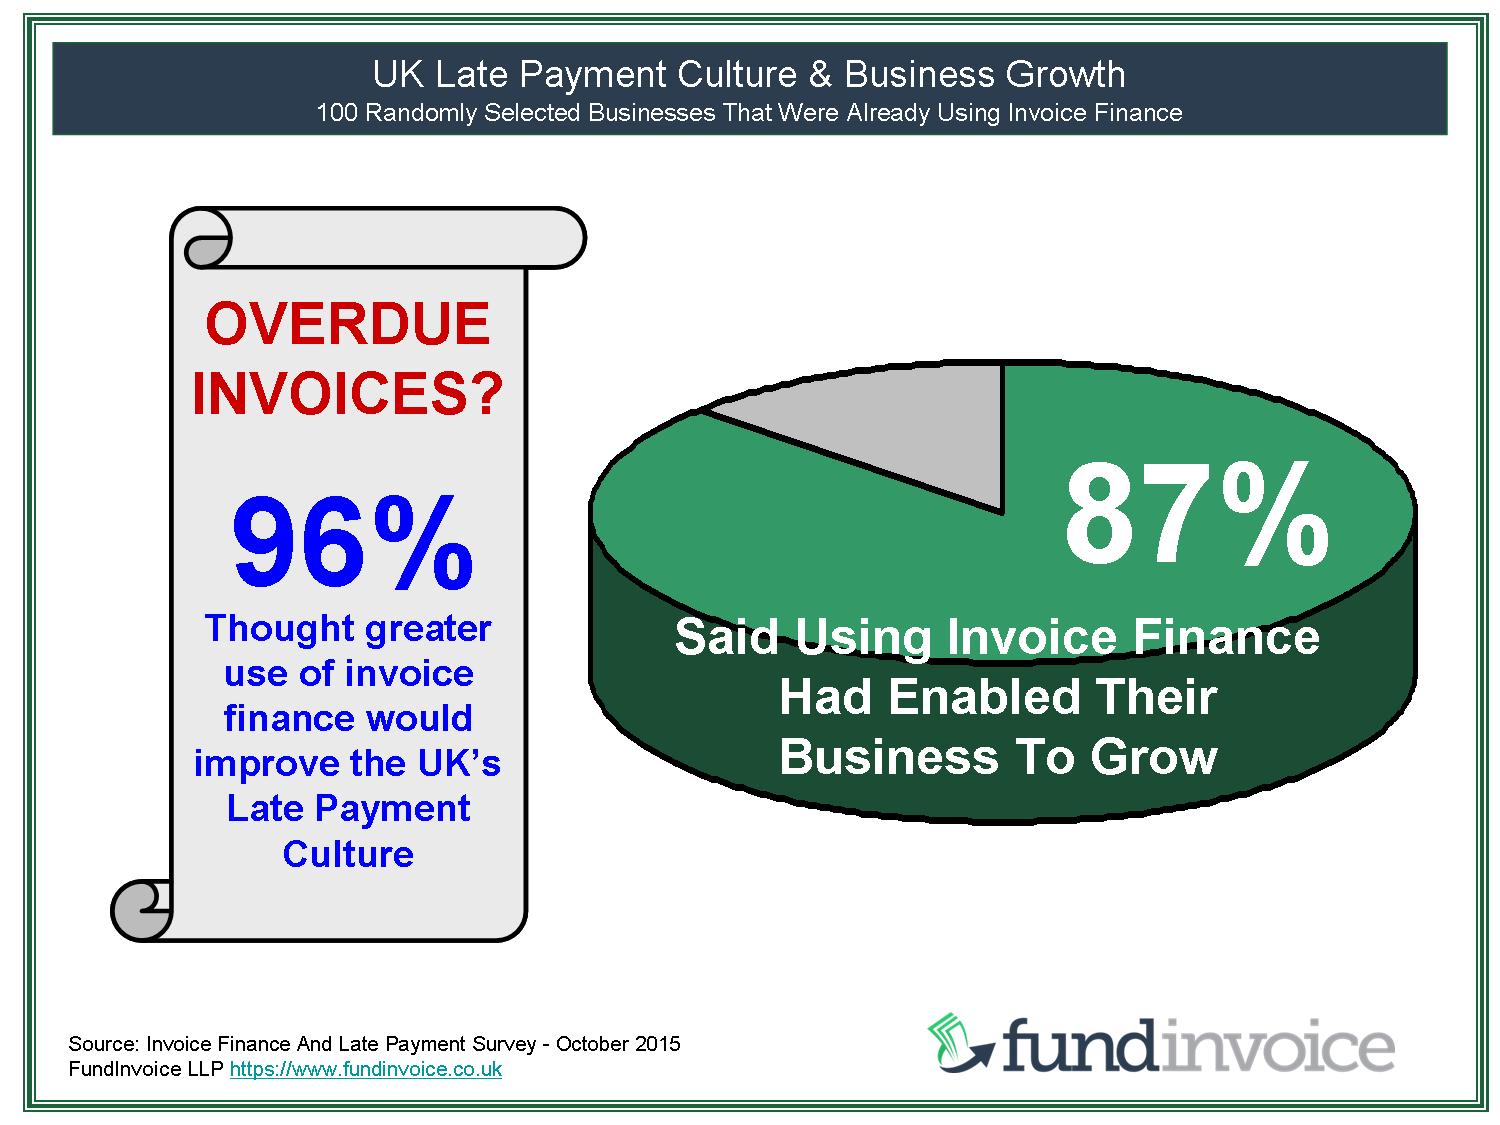 ... payment culture and enabling business growth through invoice finance